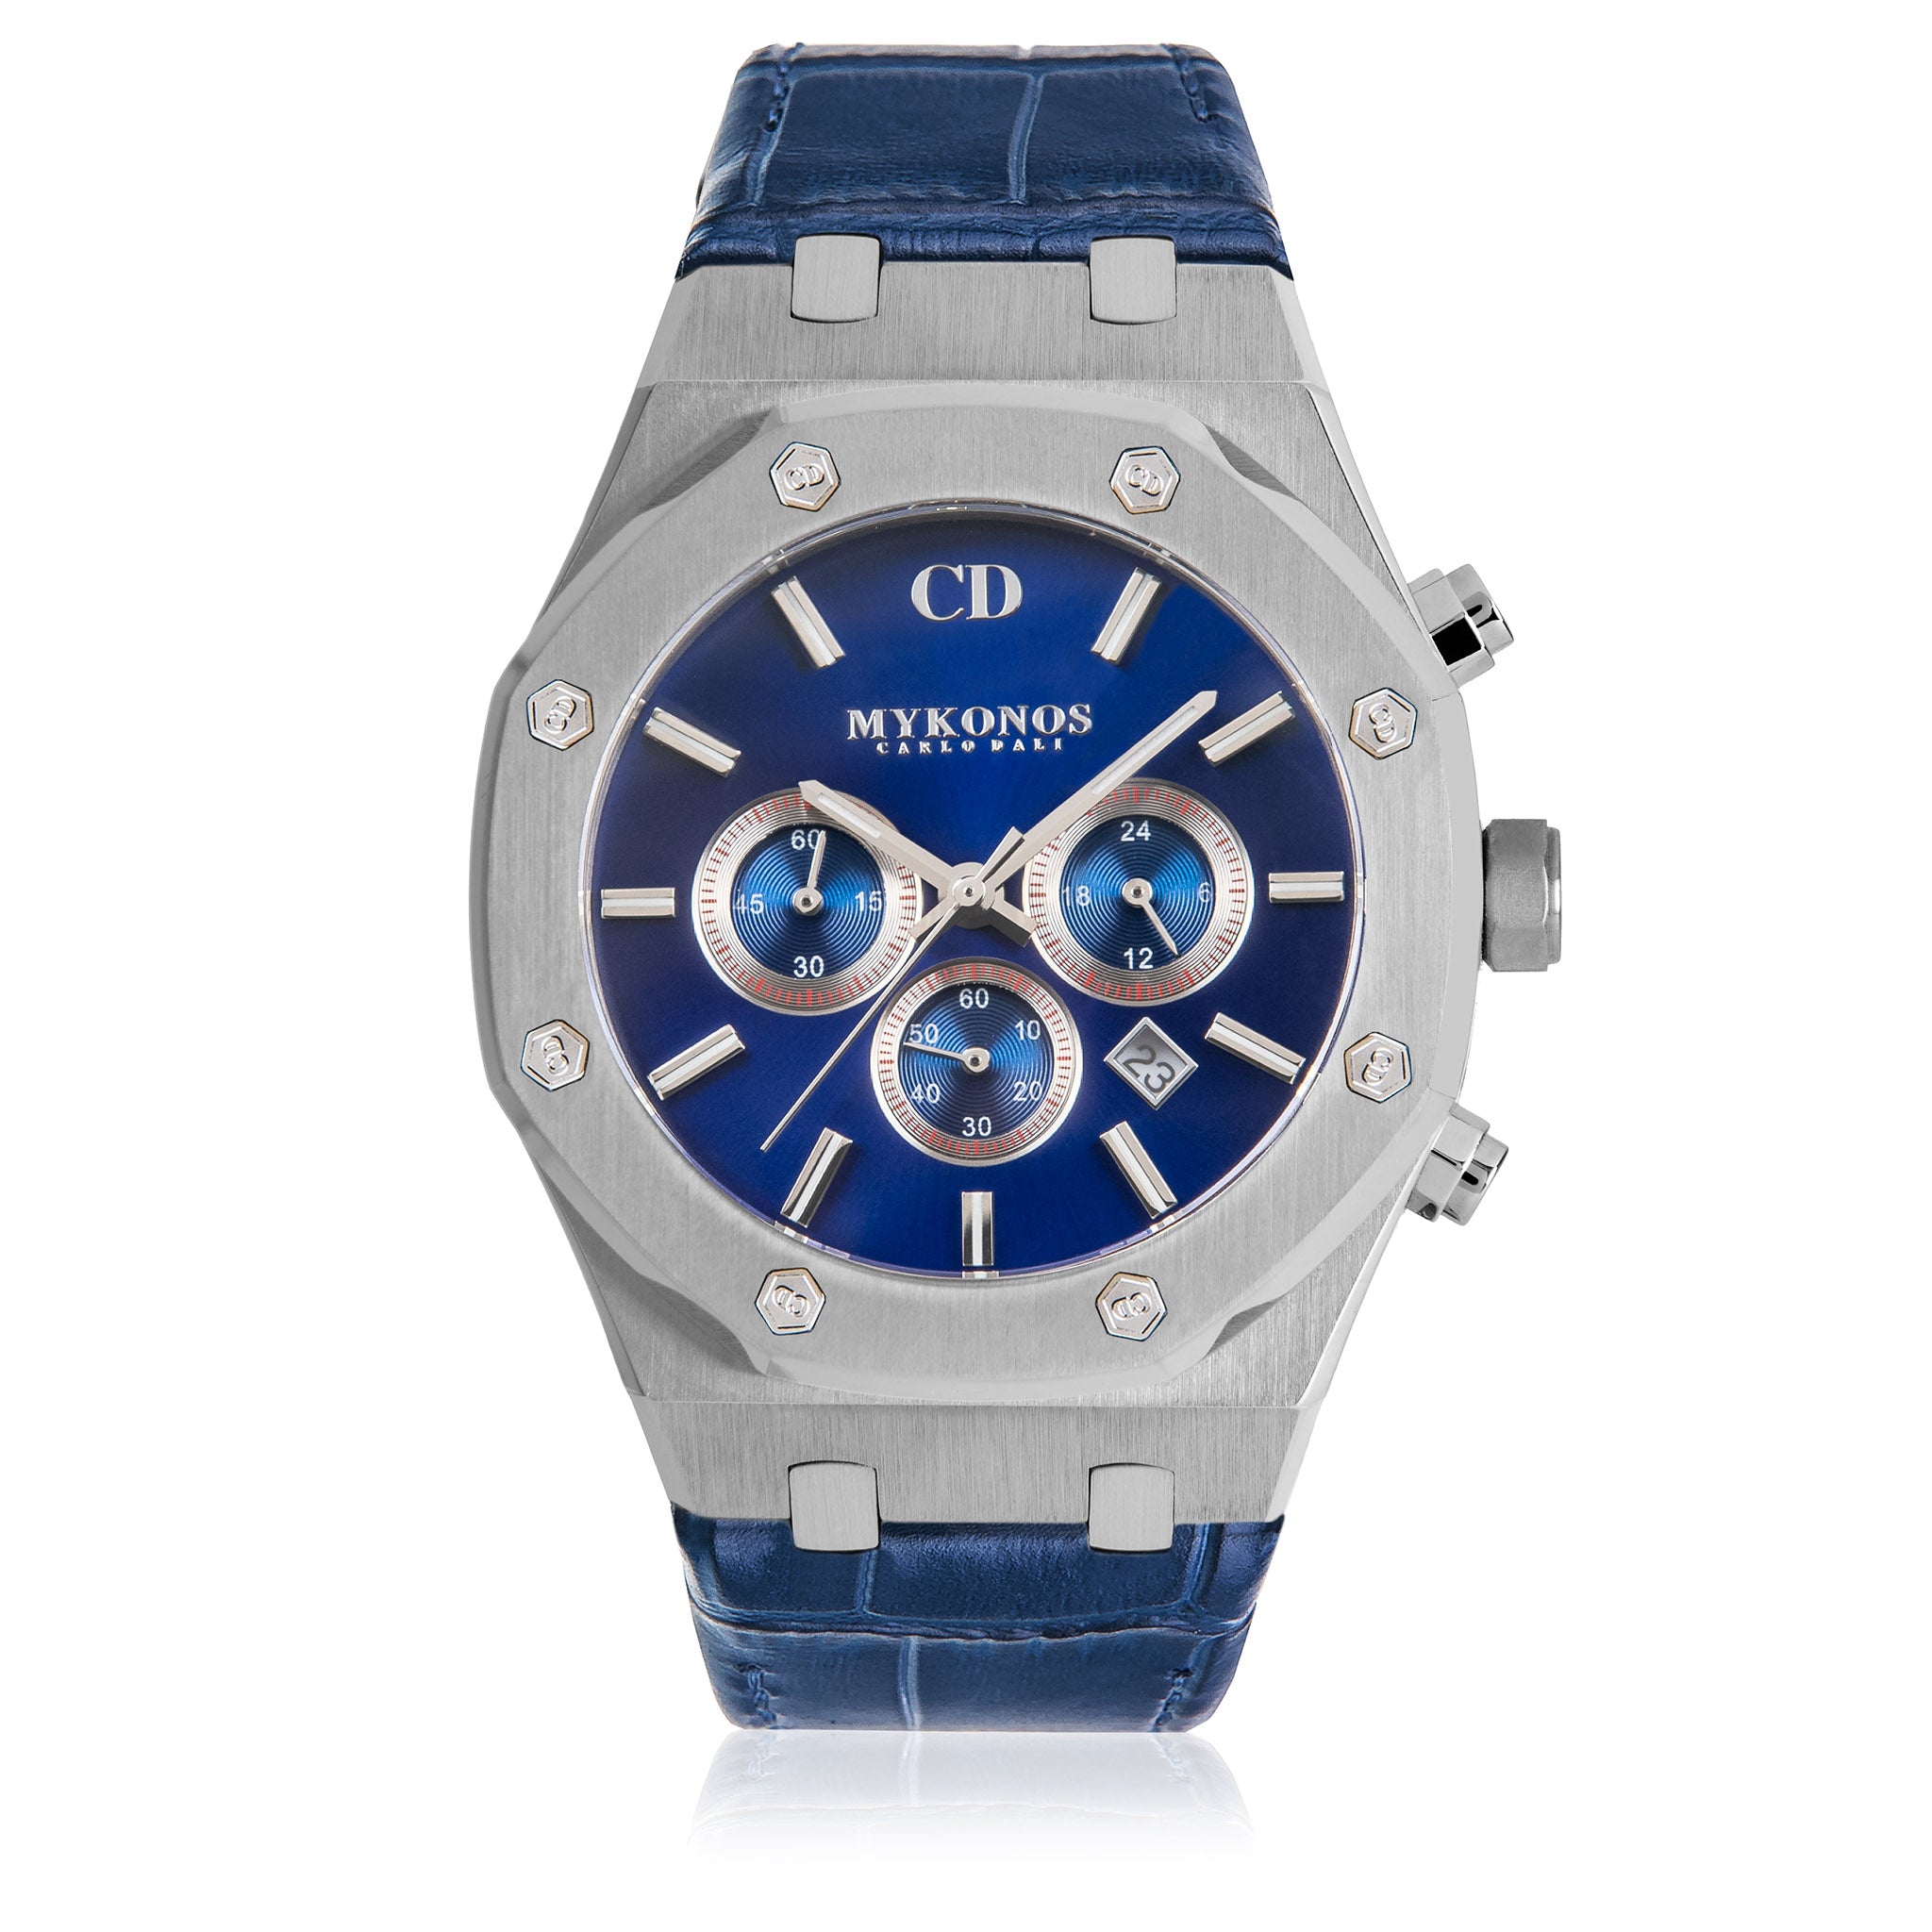 MYKONOS CHRONOGRAPH LEATHER Blue Limited watch